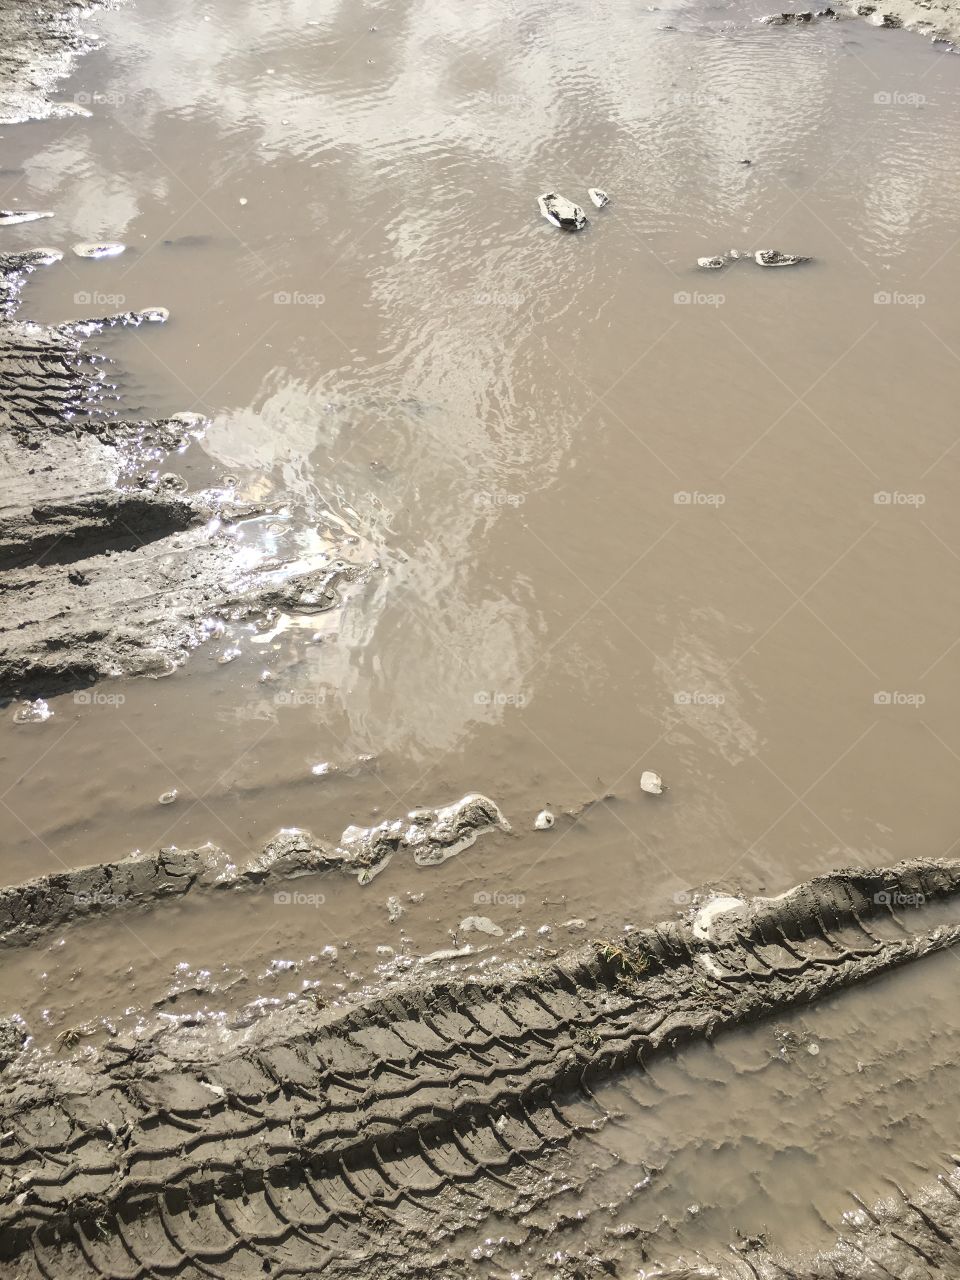 Tire tracks in a mud puddle.